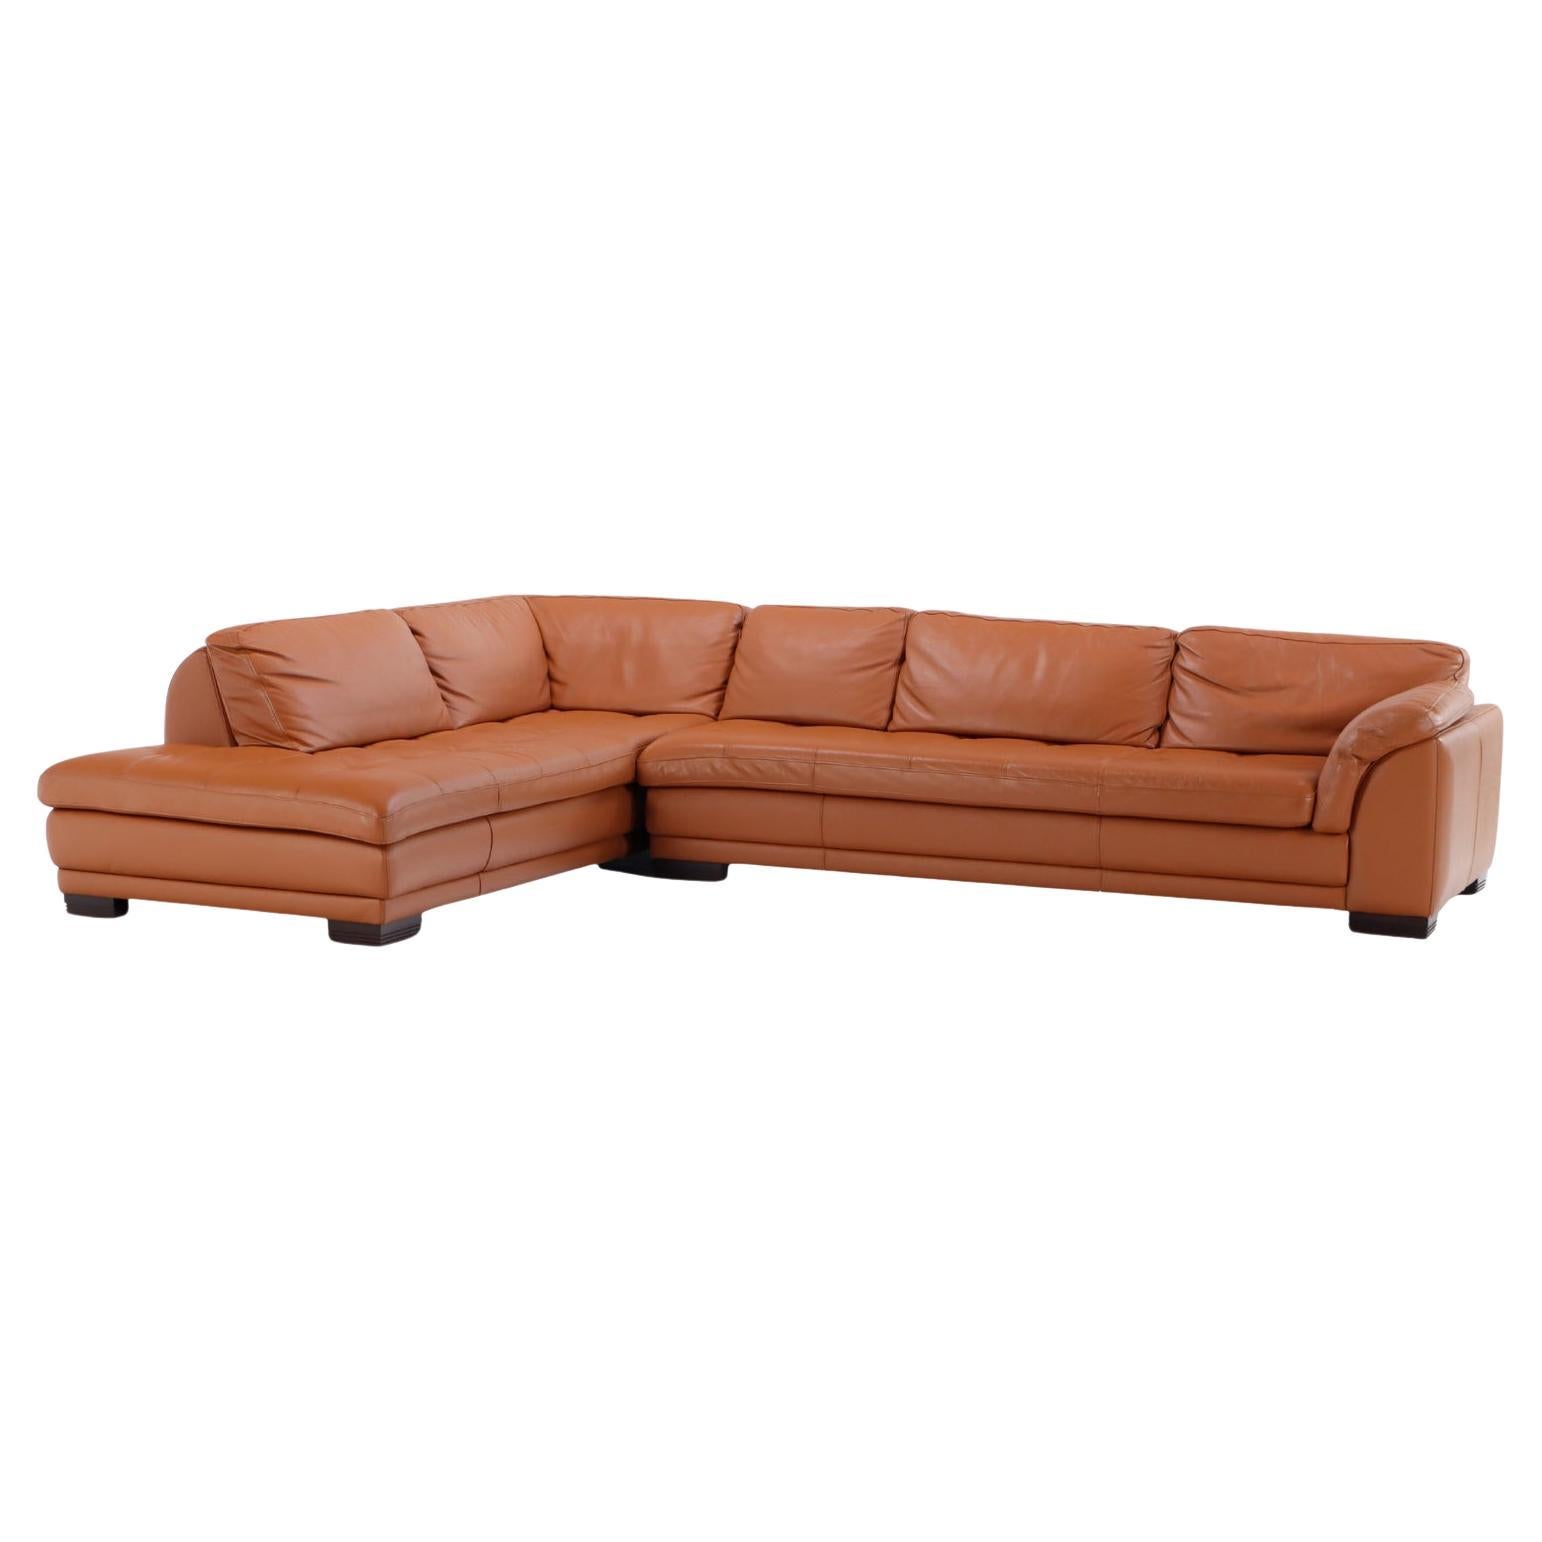 A French Roche Bobois leather sectional sofa. For Sale